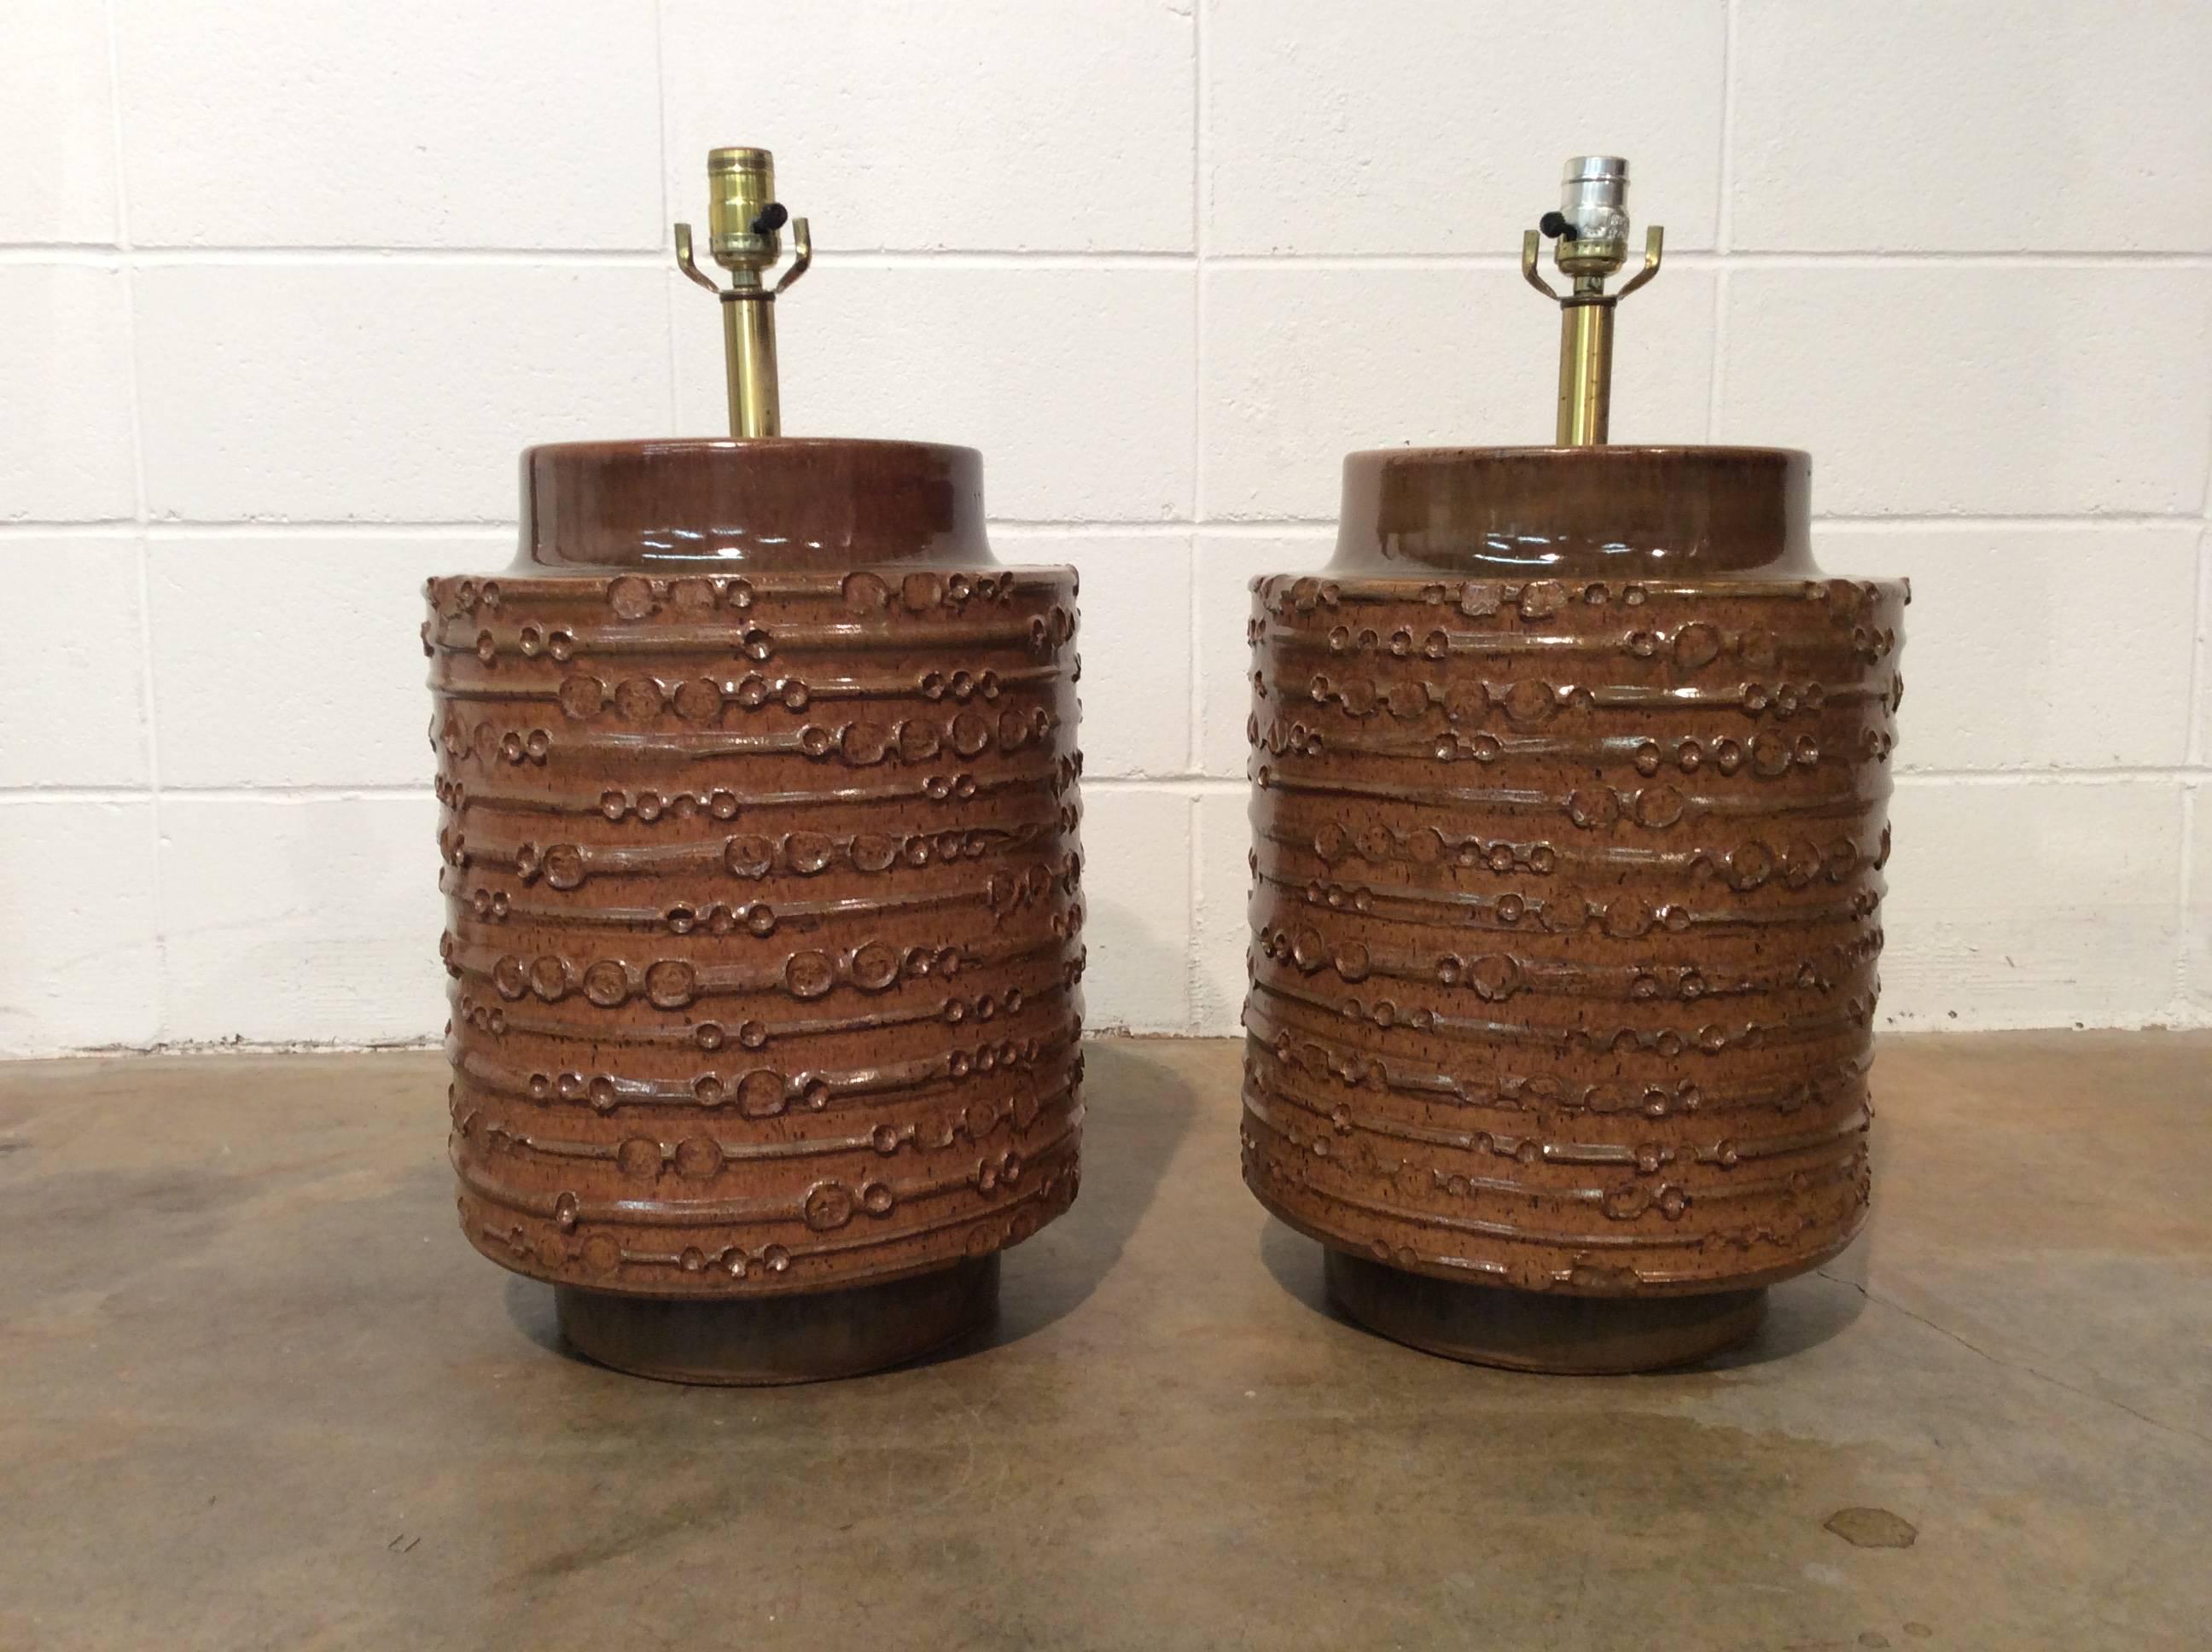 Two extra large matching table lamps designed by David Cressey. Lamps were acquired from the original owners and are in above average condition. There are no noticeable defects in the ceramic. The wiring is assumed to be original and is in excellent